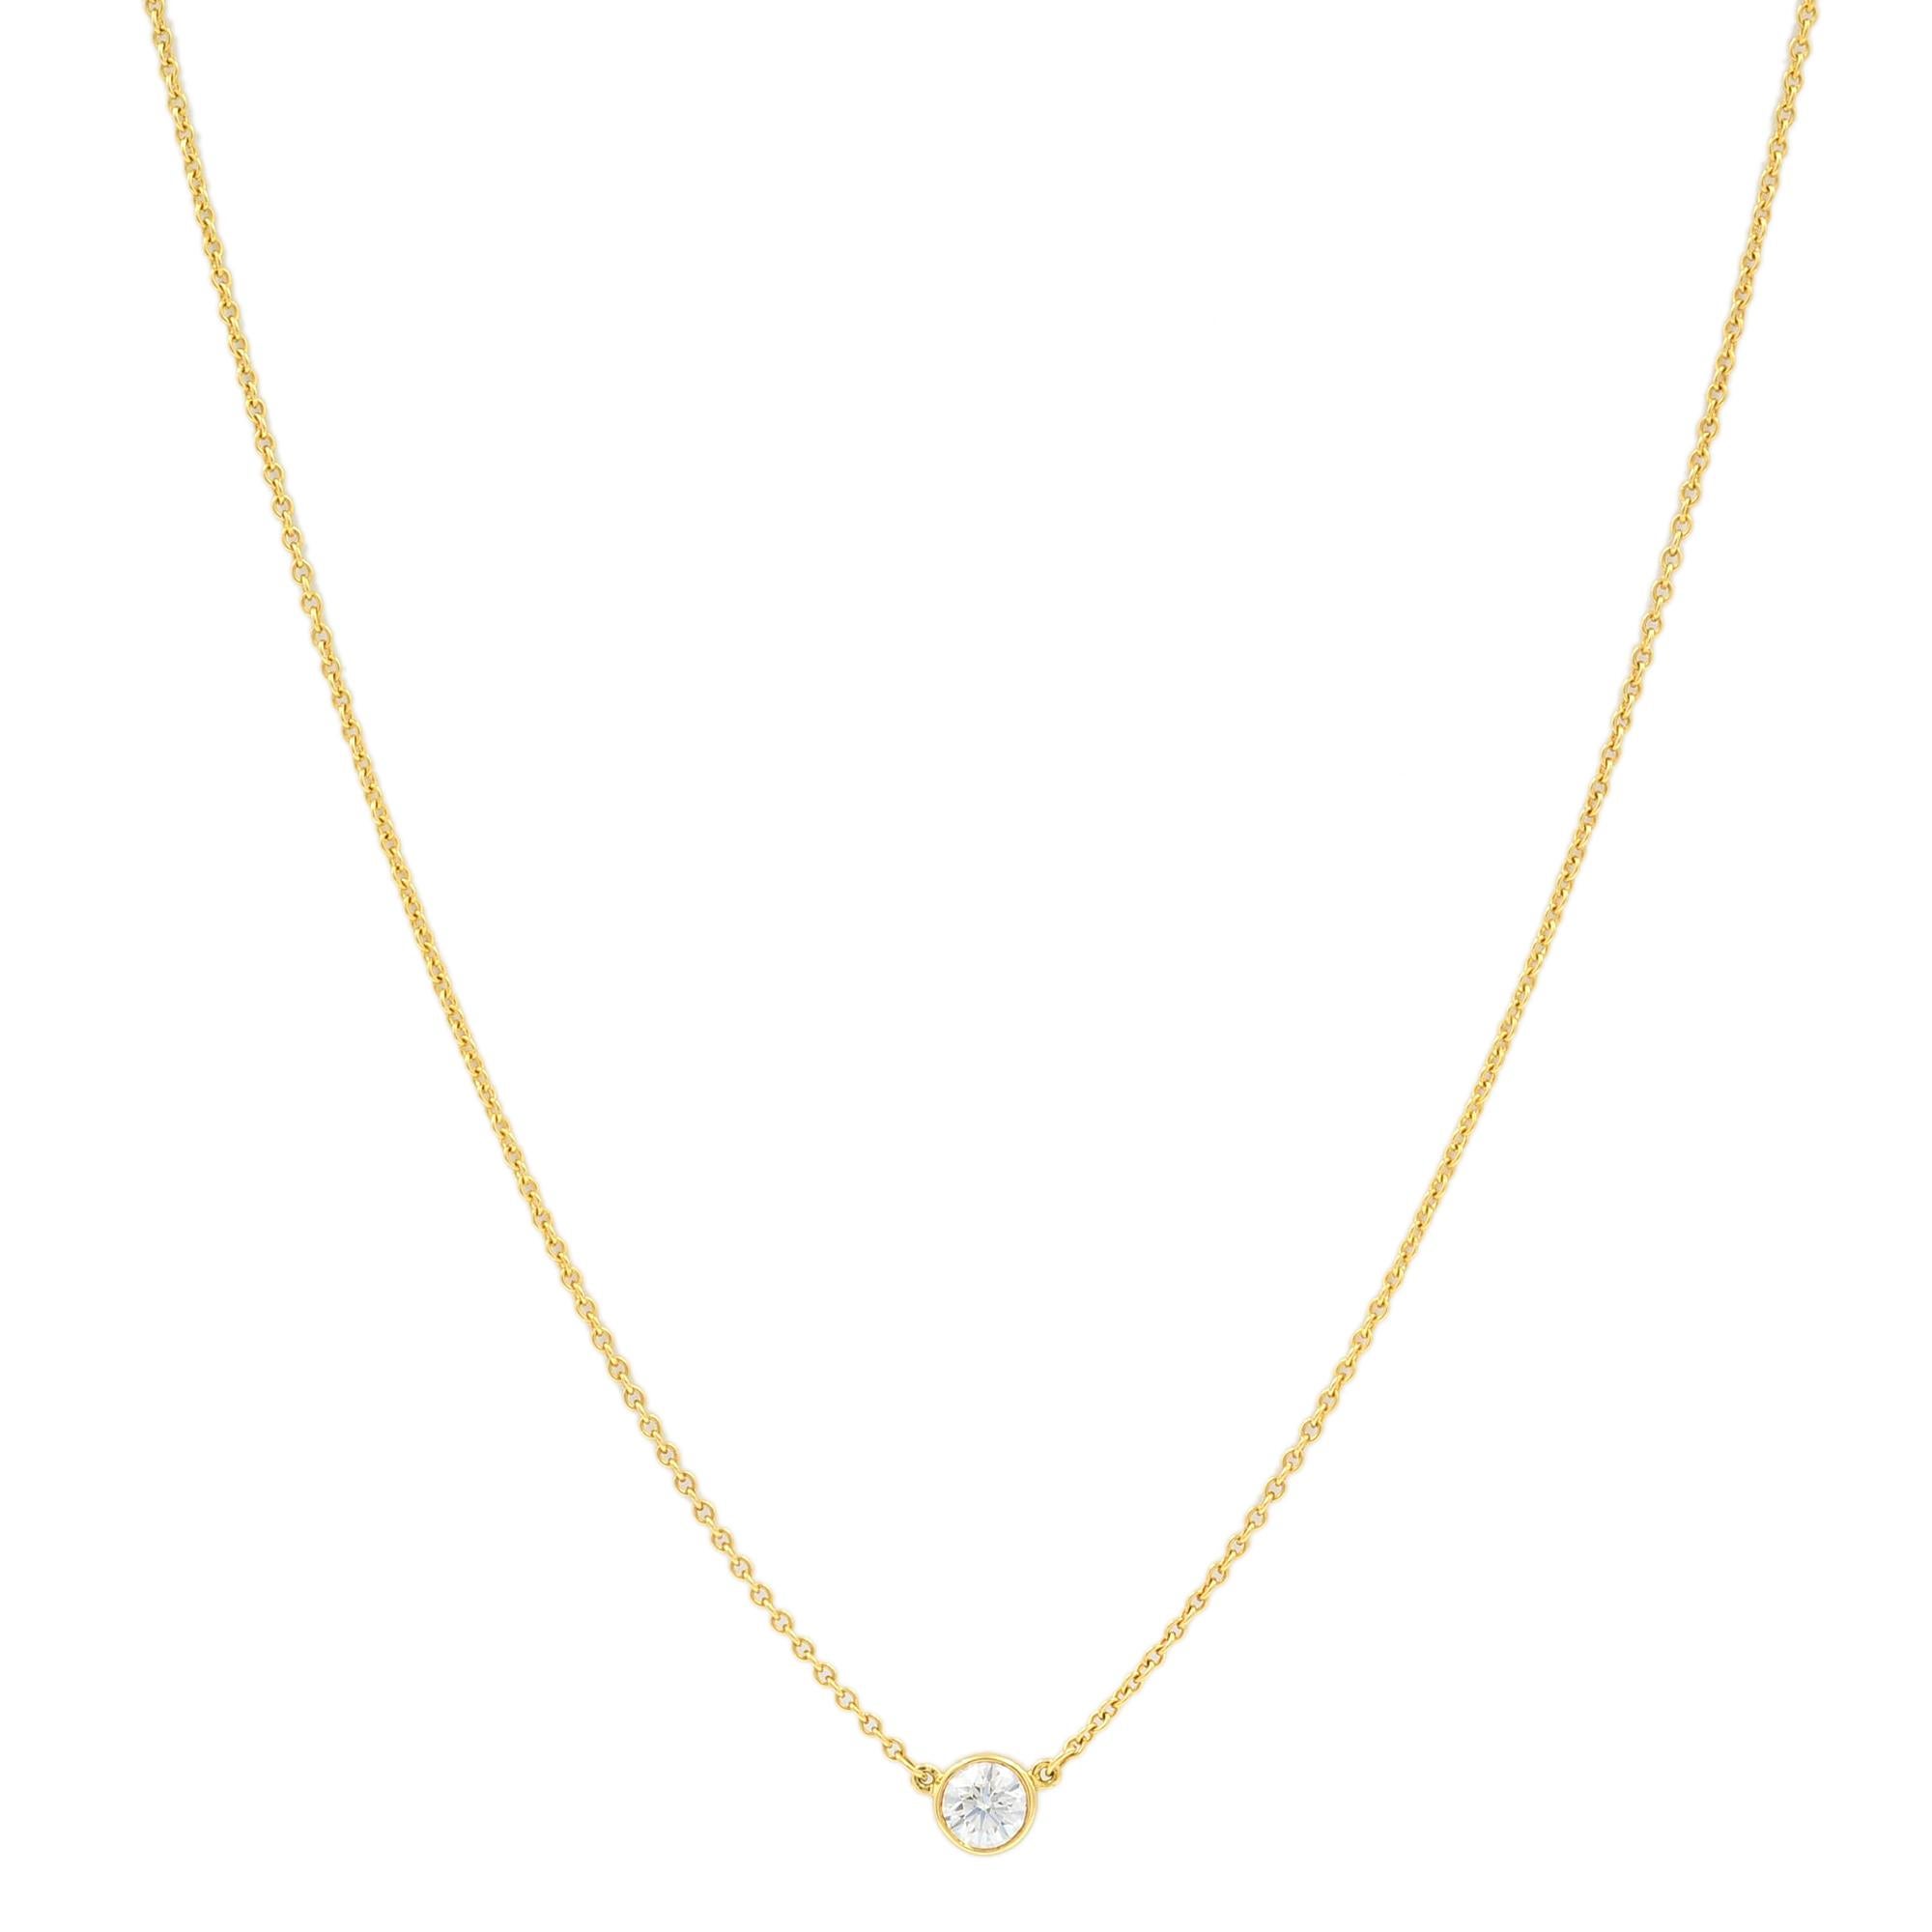 Beautiful diamond by the yard authentic Tiffany & Co necklace set with round brilliant cut diamond of an amazing color and clarity. 
15 inches long this necklace will fall right on your collar bone. 
Very delicate, feminine and classy. Comes with a